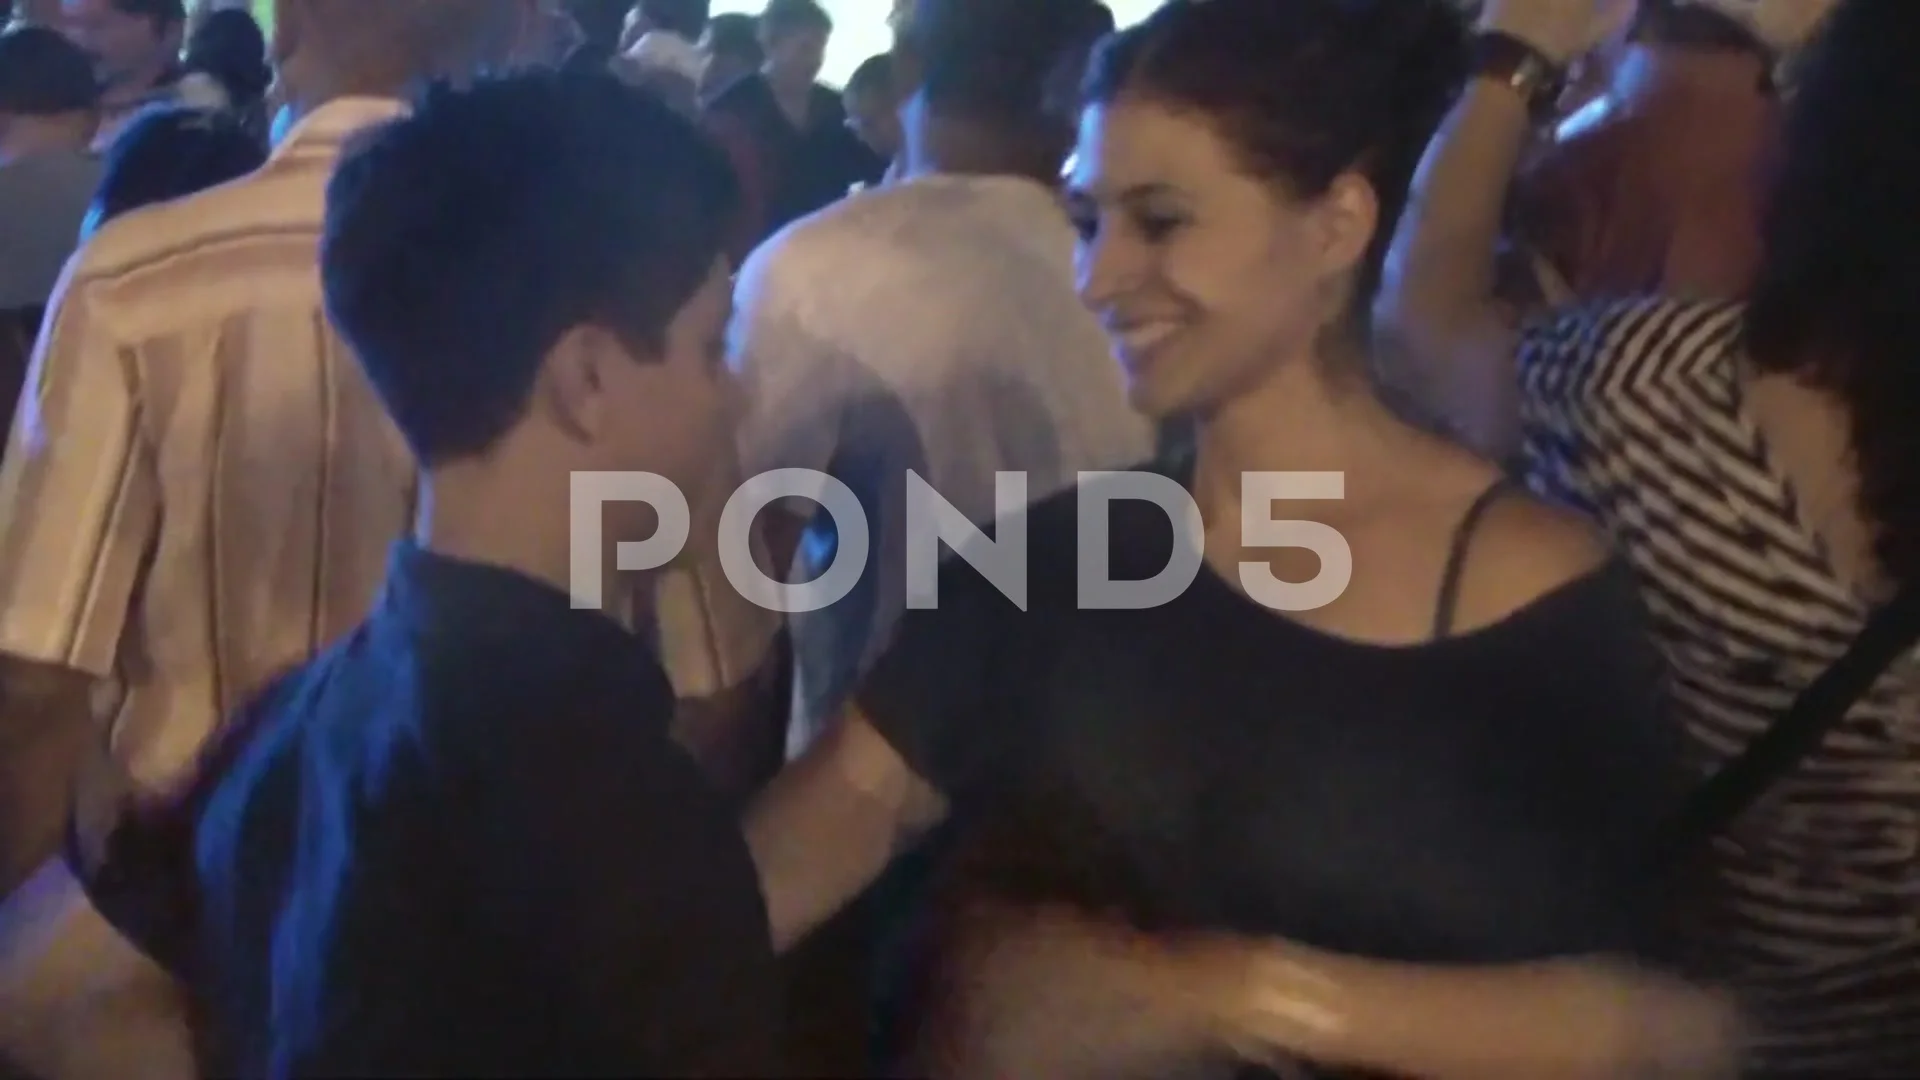 Salsa Dancing with Talented 14-Year-Old Boy, Puerto Rico pic